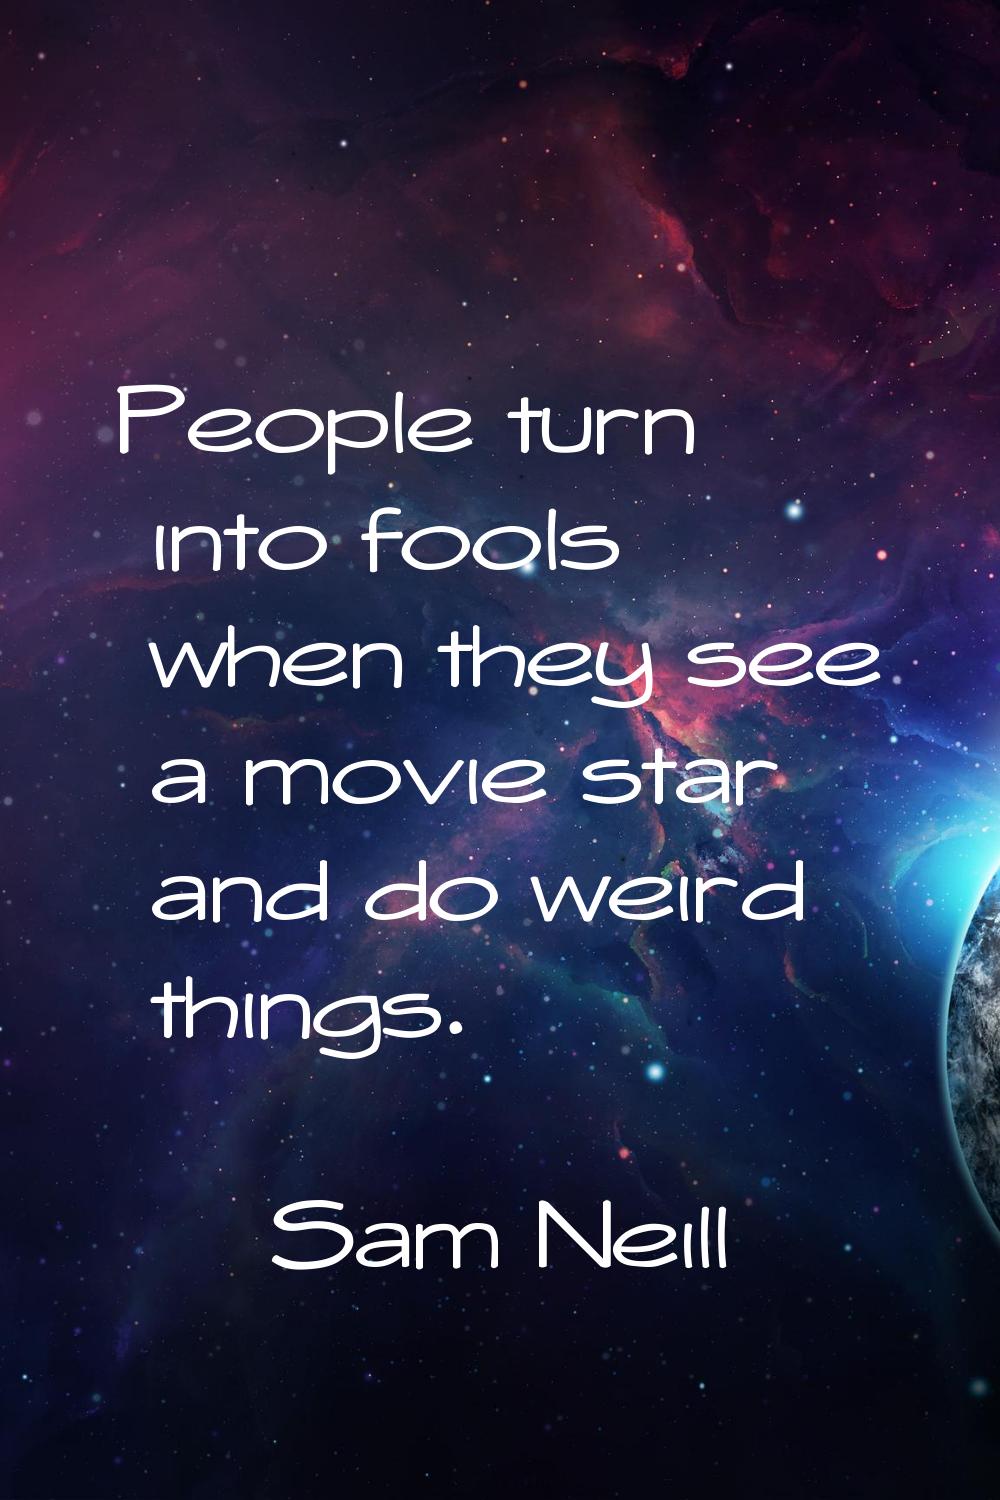 People turn into fools when they see a movie star and do weird things.